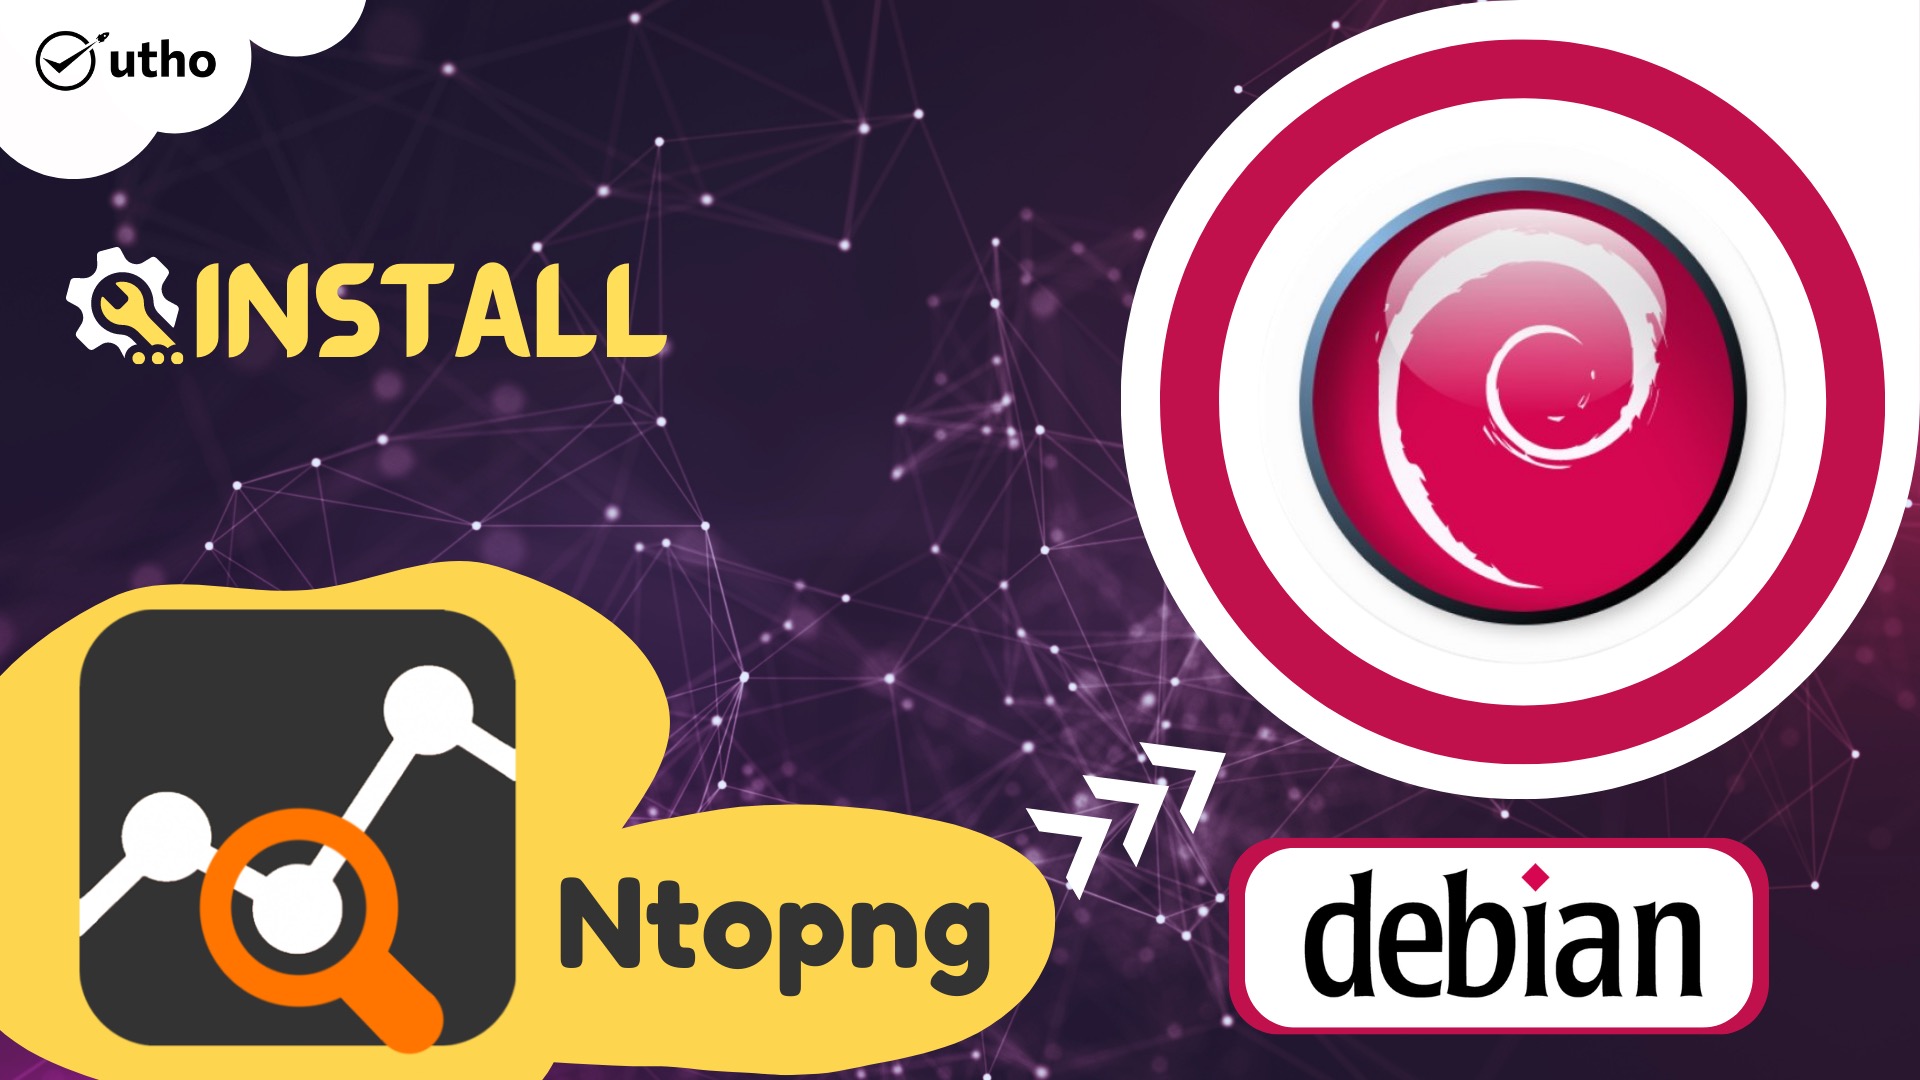 How to Install Ntopng on Debian